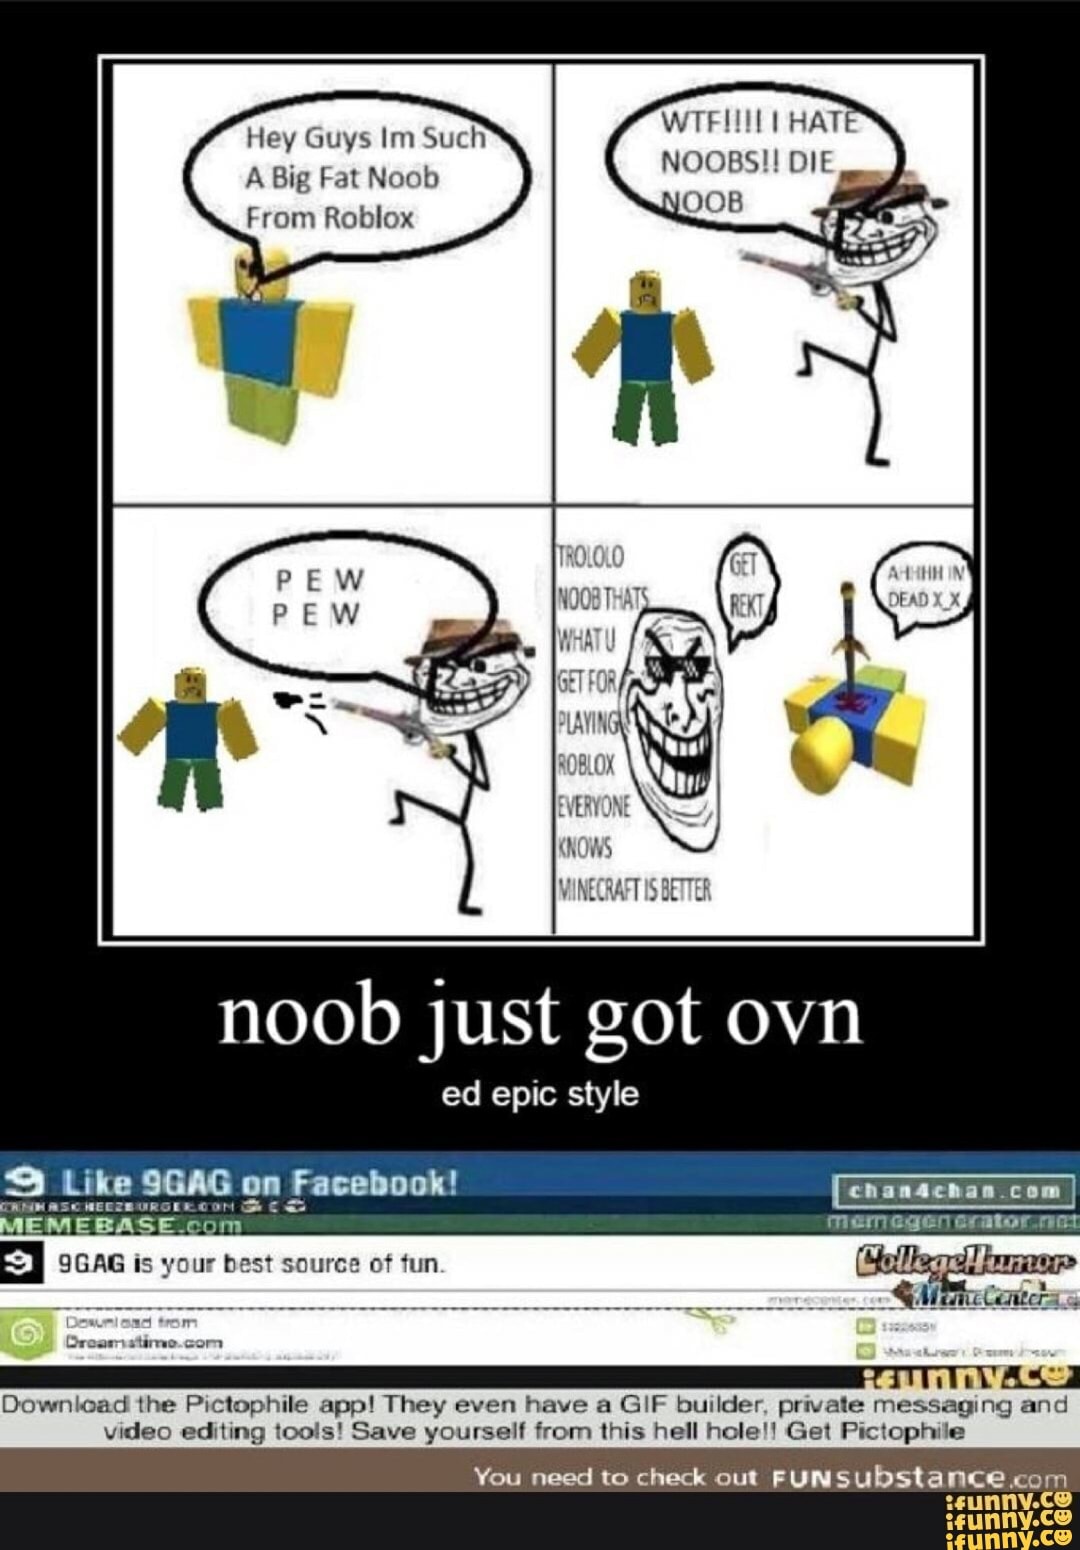 Hey Guys Im Such A Big Fat Noob From Roblox Noob Just Got Ovn I N Mi Download The Plclophile App They Even Have A Gif Bwlder Pnvale Messaging And Wdeo Editing - big fat noob roblox